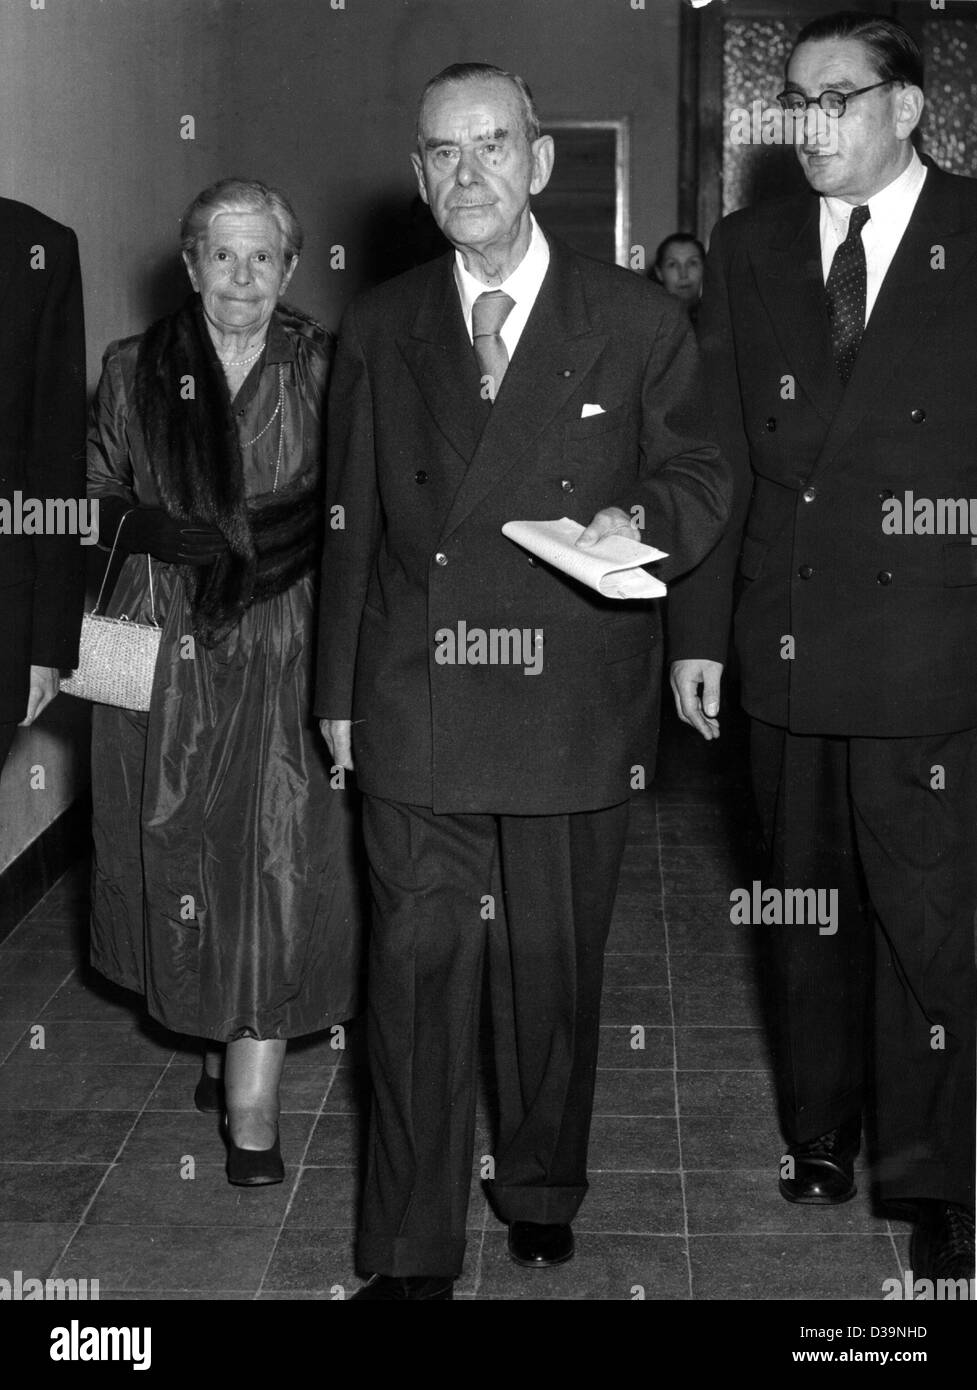 (dpa) - German author Thomas Mann (C) and his wife Katja at the University of Cologne, 24 August 1954 accompanied by Professor Dr. Emmerich (R). Mann had read from his novel 'Confessions of Felix Krull'. His first novel 'Buddenbrooks' (1901) had already made him world-famous. Other important works a Stock Photo